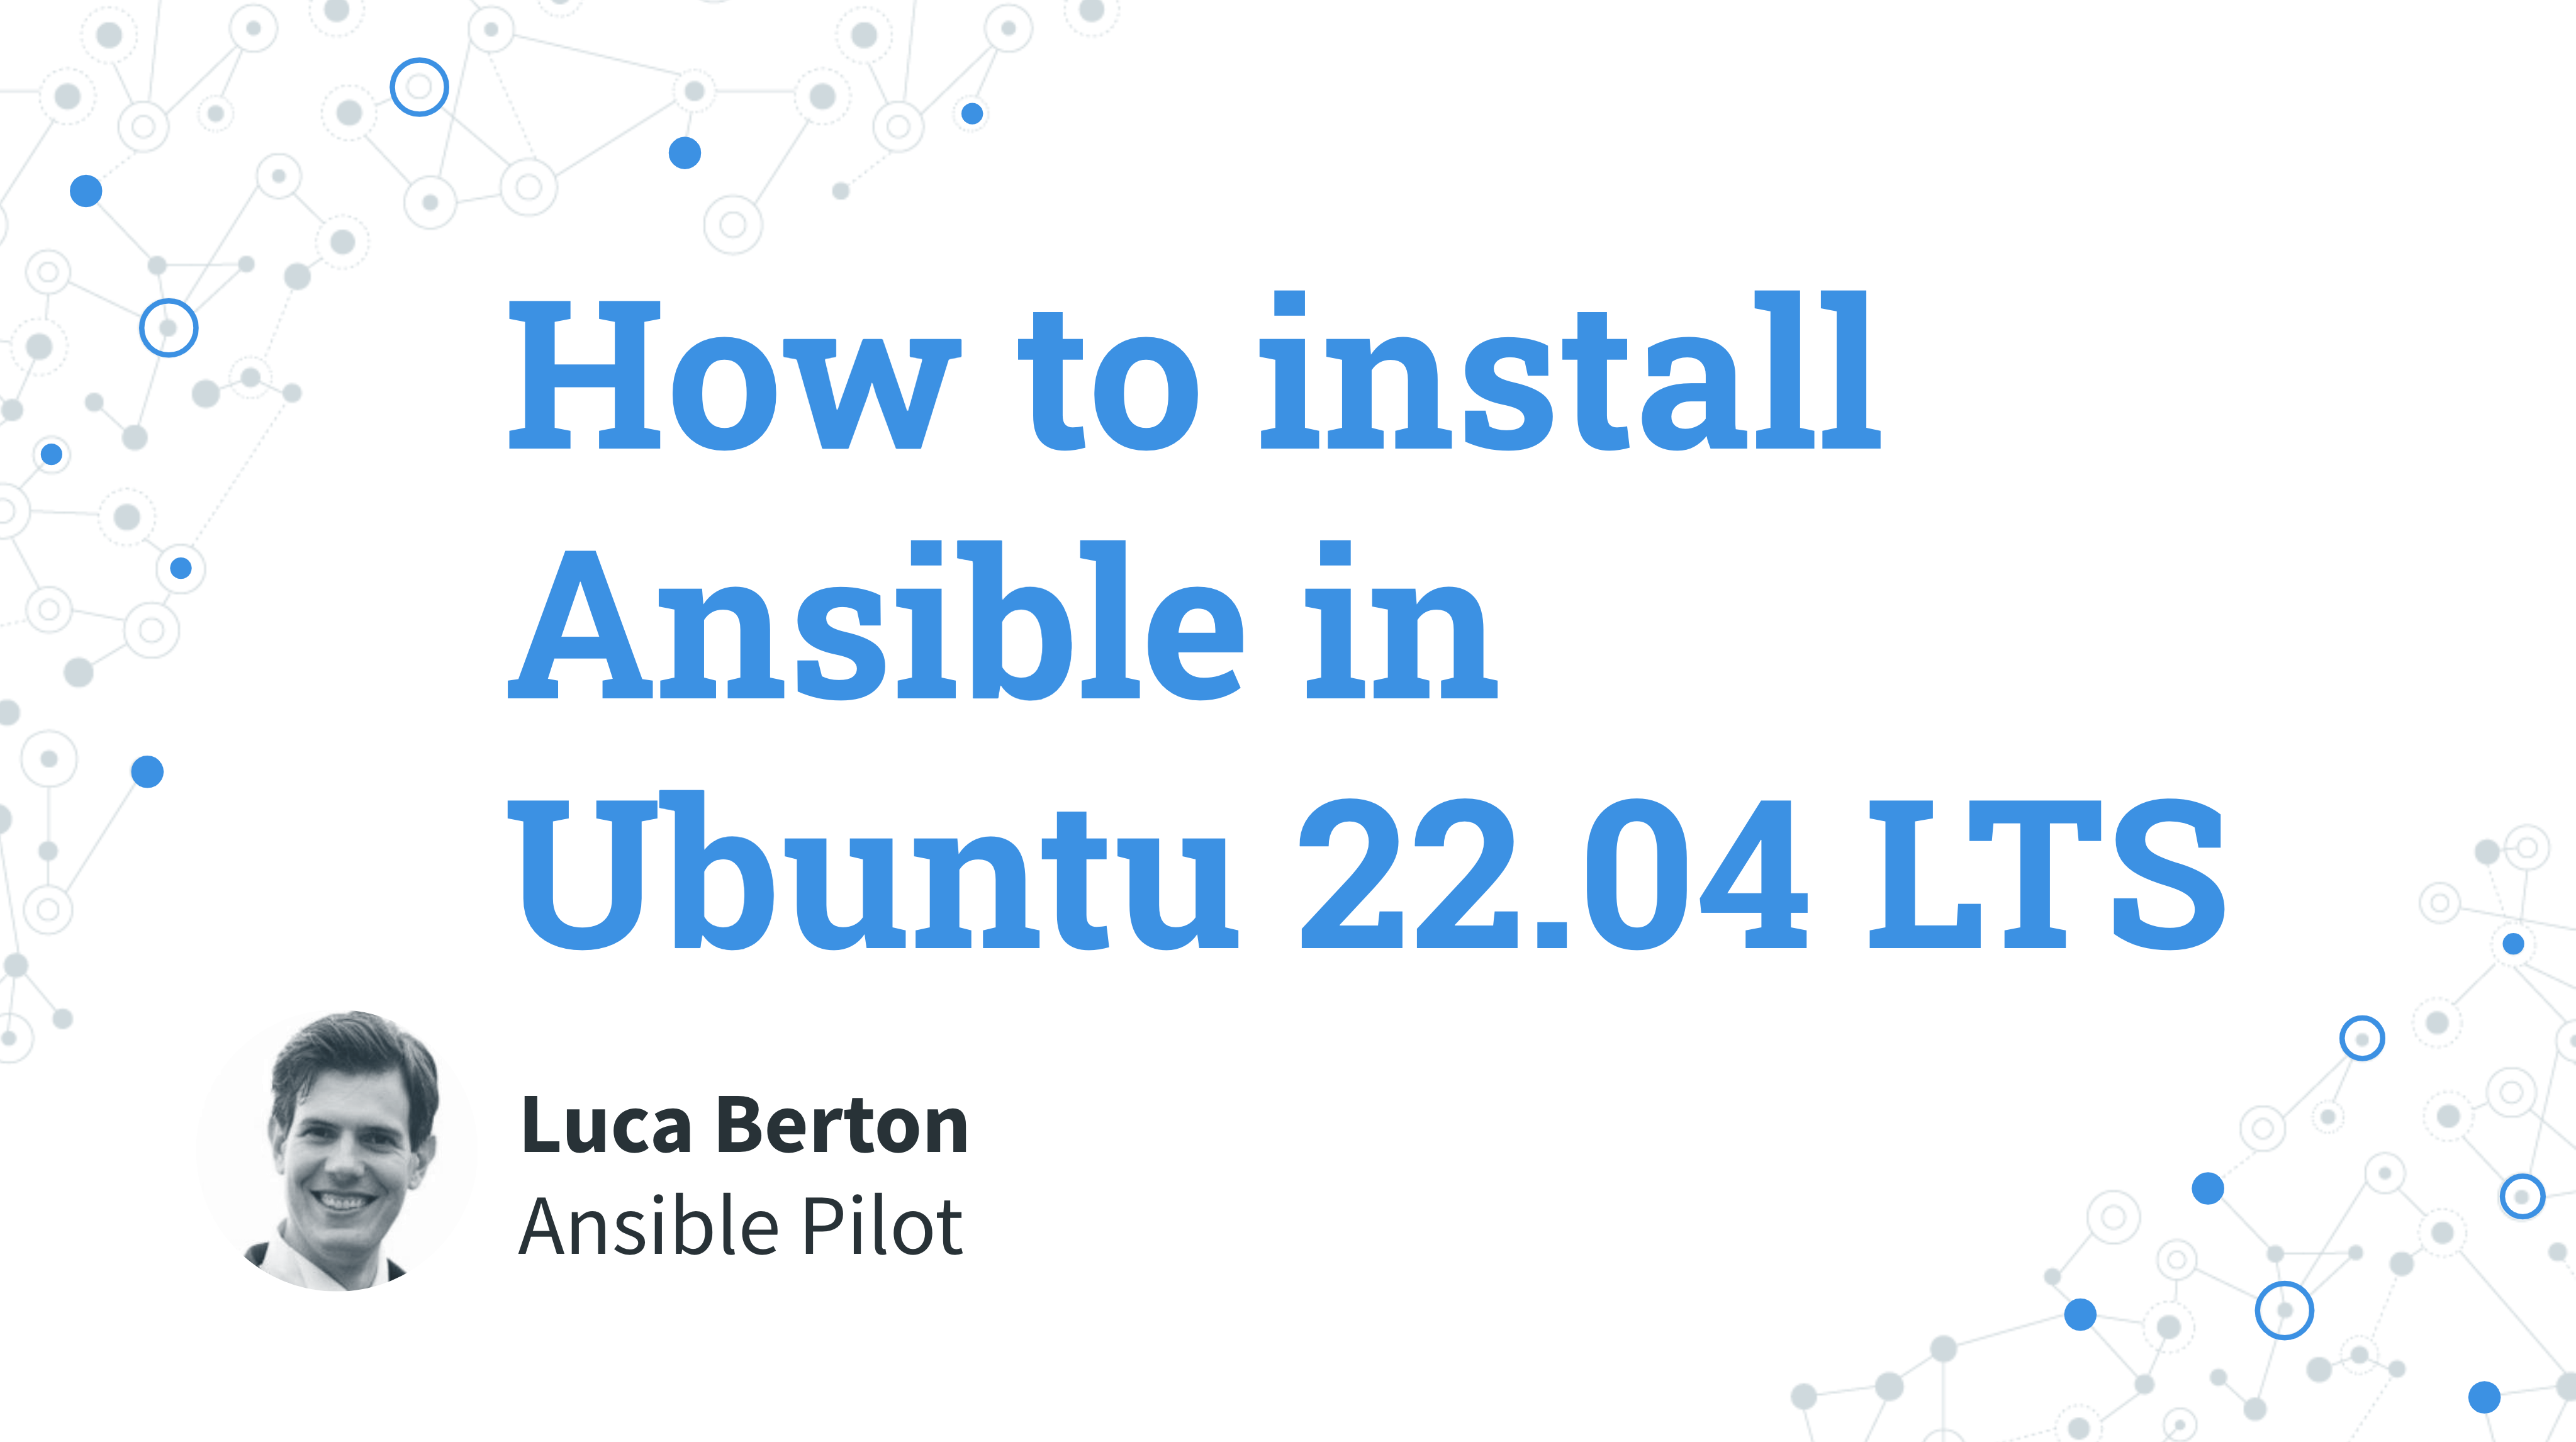 How to install Ansible in Ubuntu 22.04 LTS Jammy Jellyfish — Ansible Install